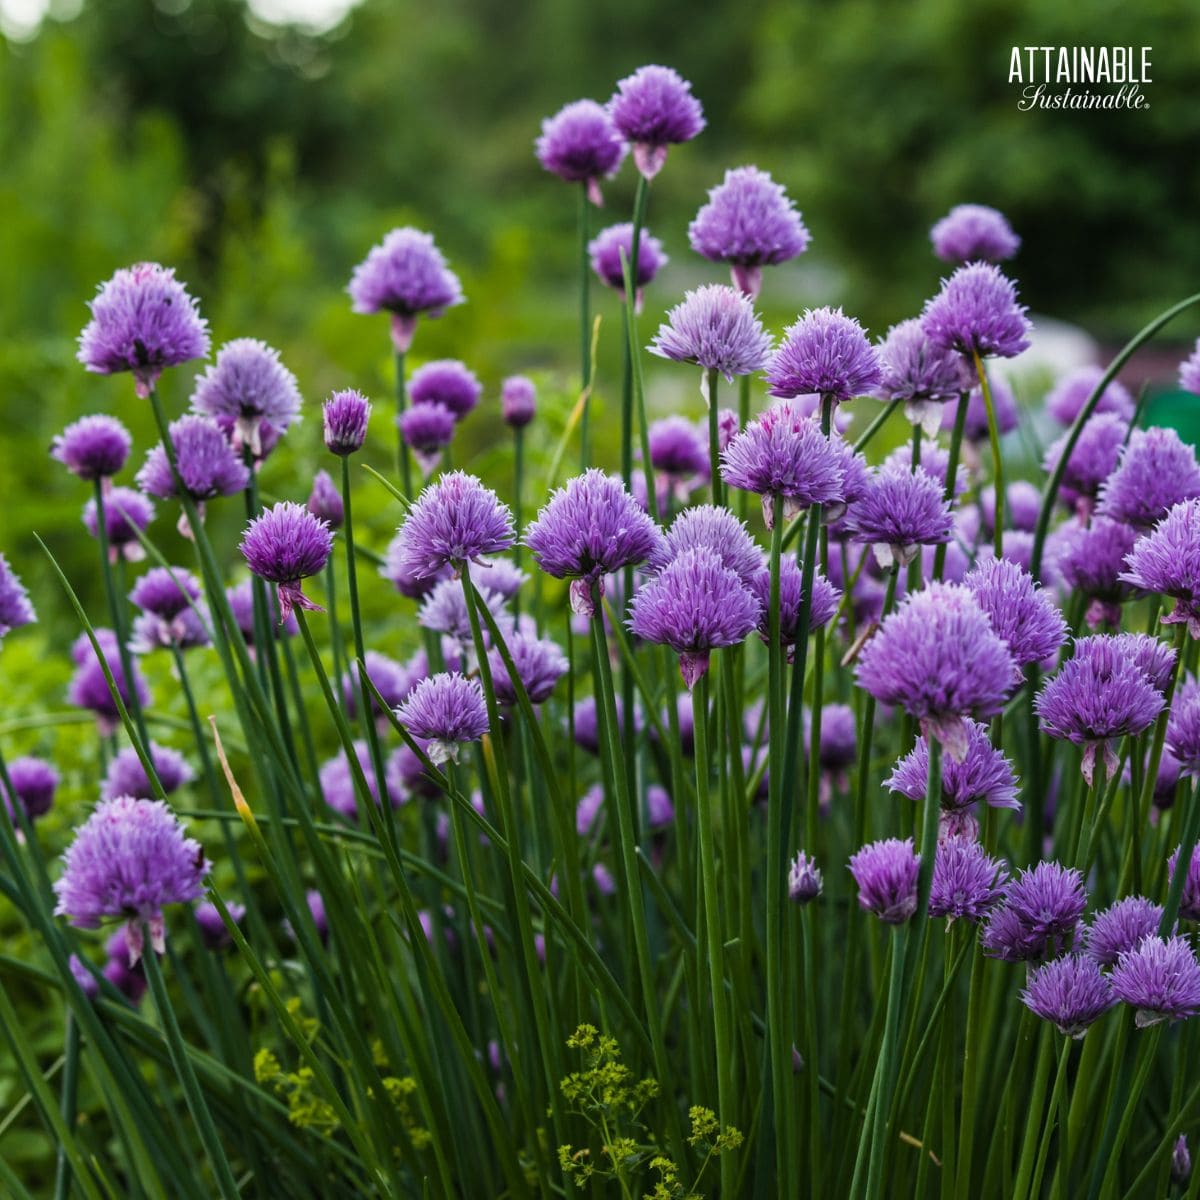 Purple flowers on chive plant.